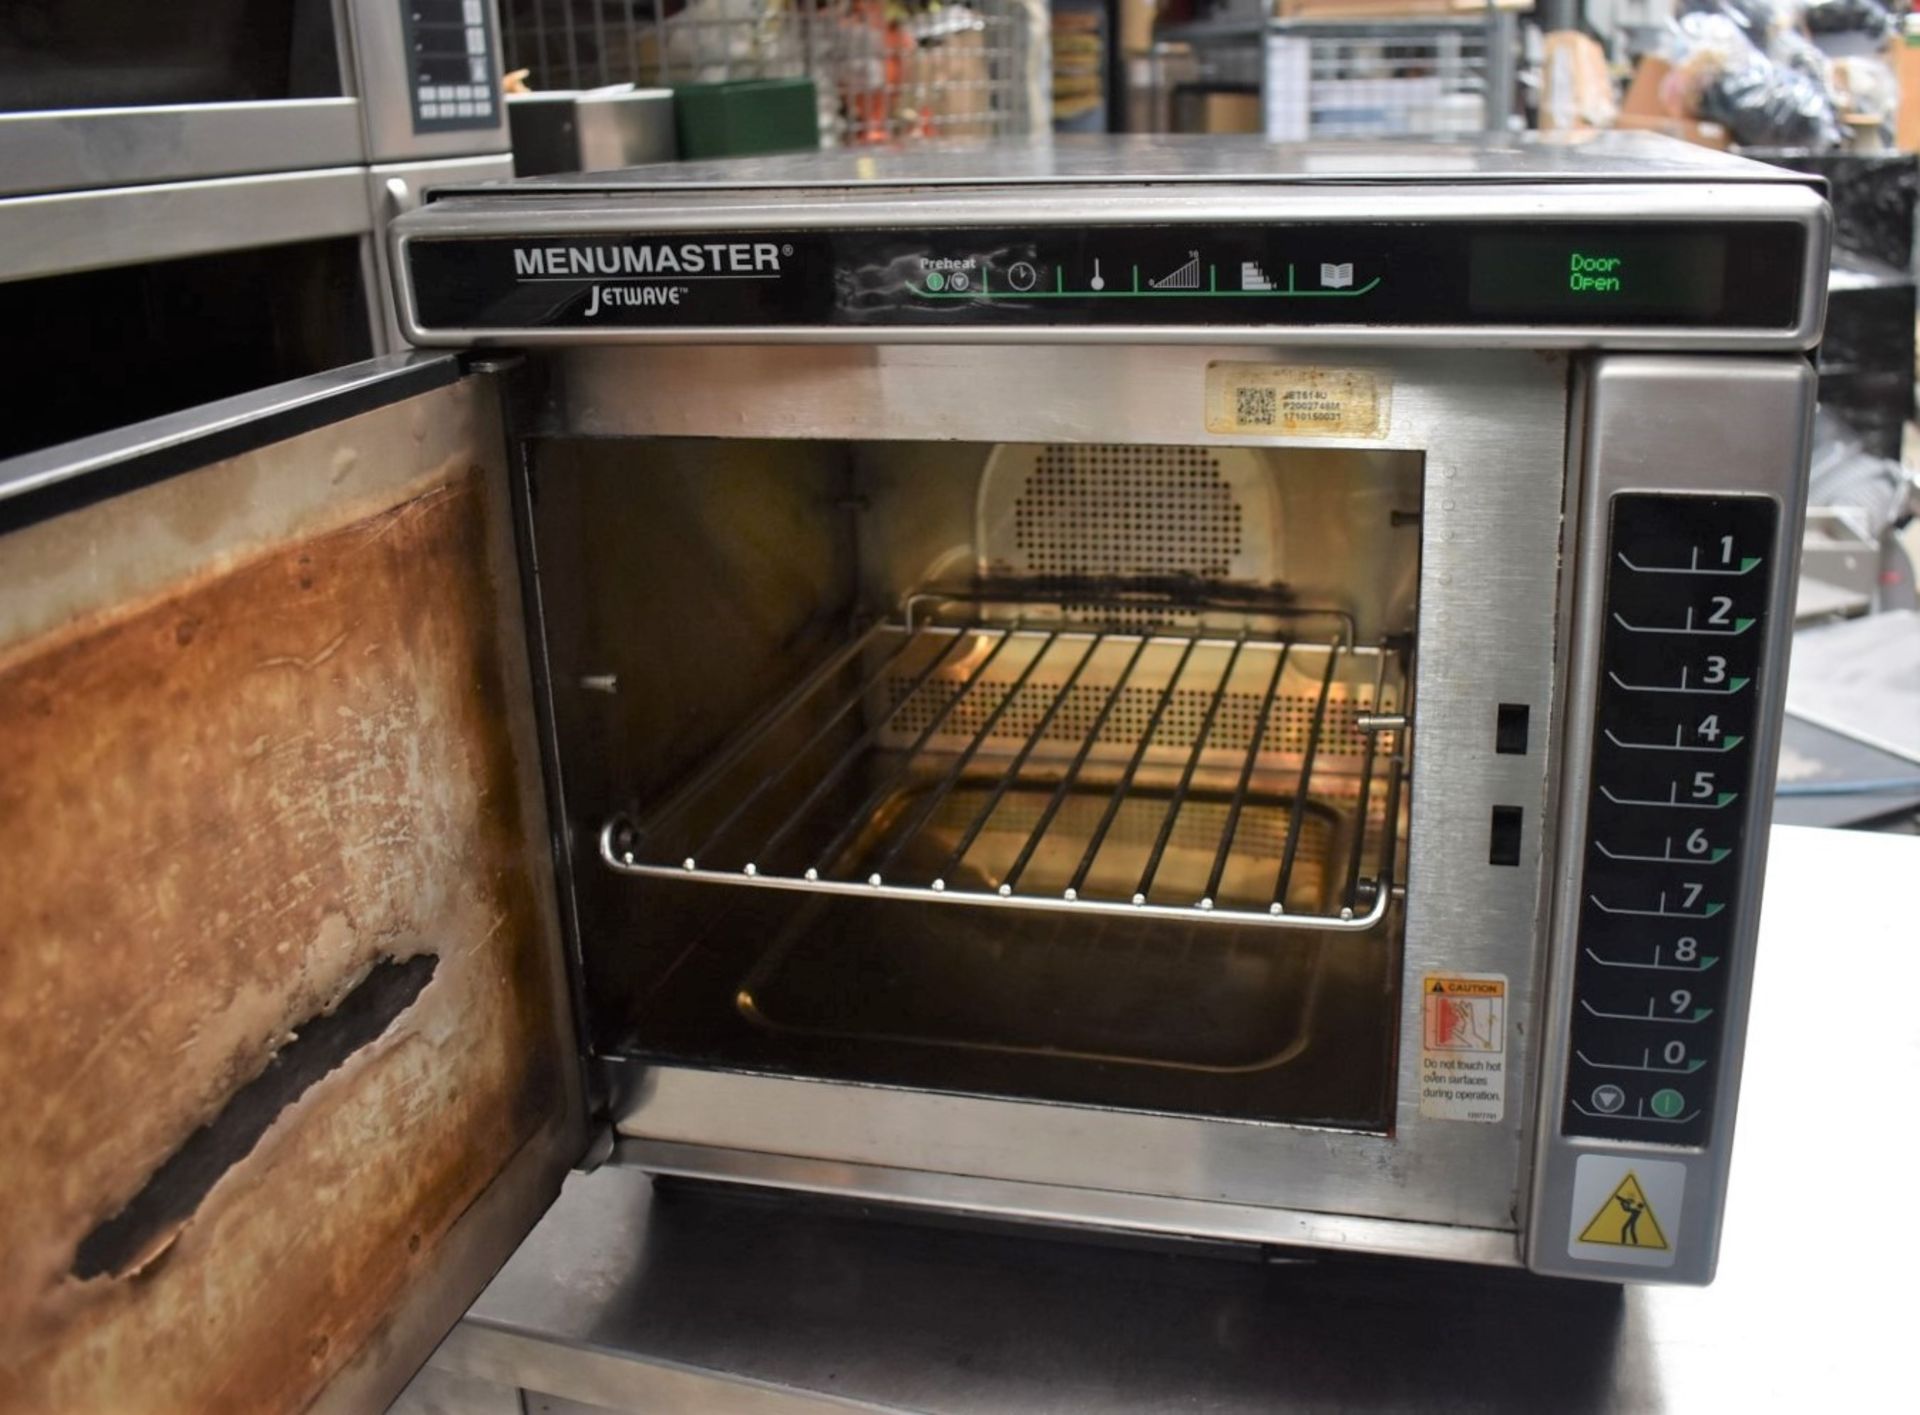 1 x Menumaster Jetwave JET514U High Speed Combination Microwave Oven - RRP £2,400 - Manufacture - Image 7 of 11